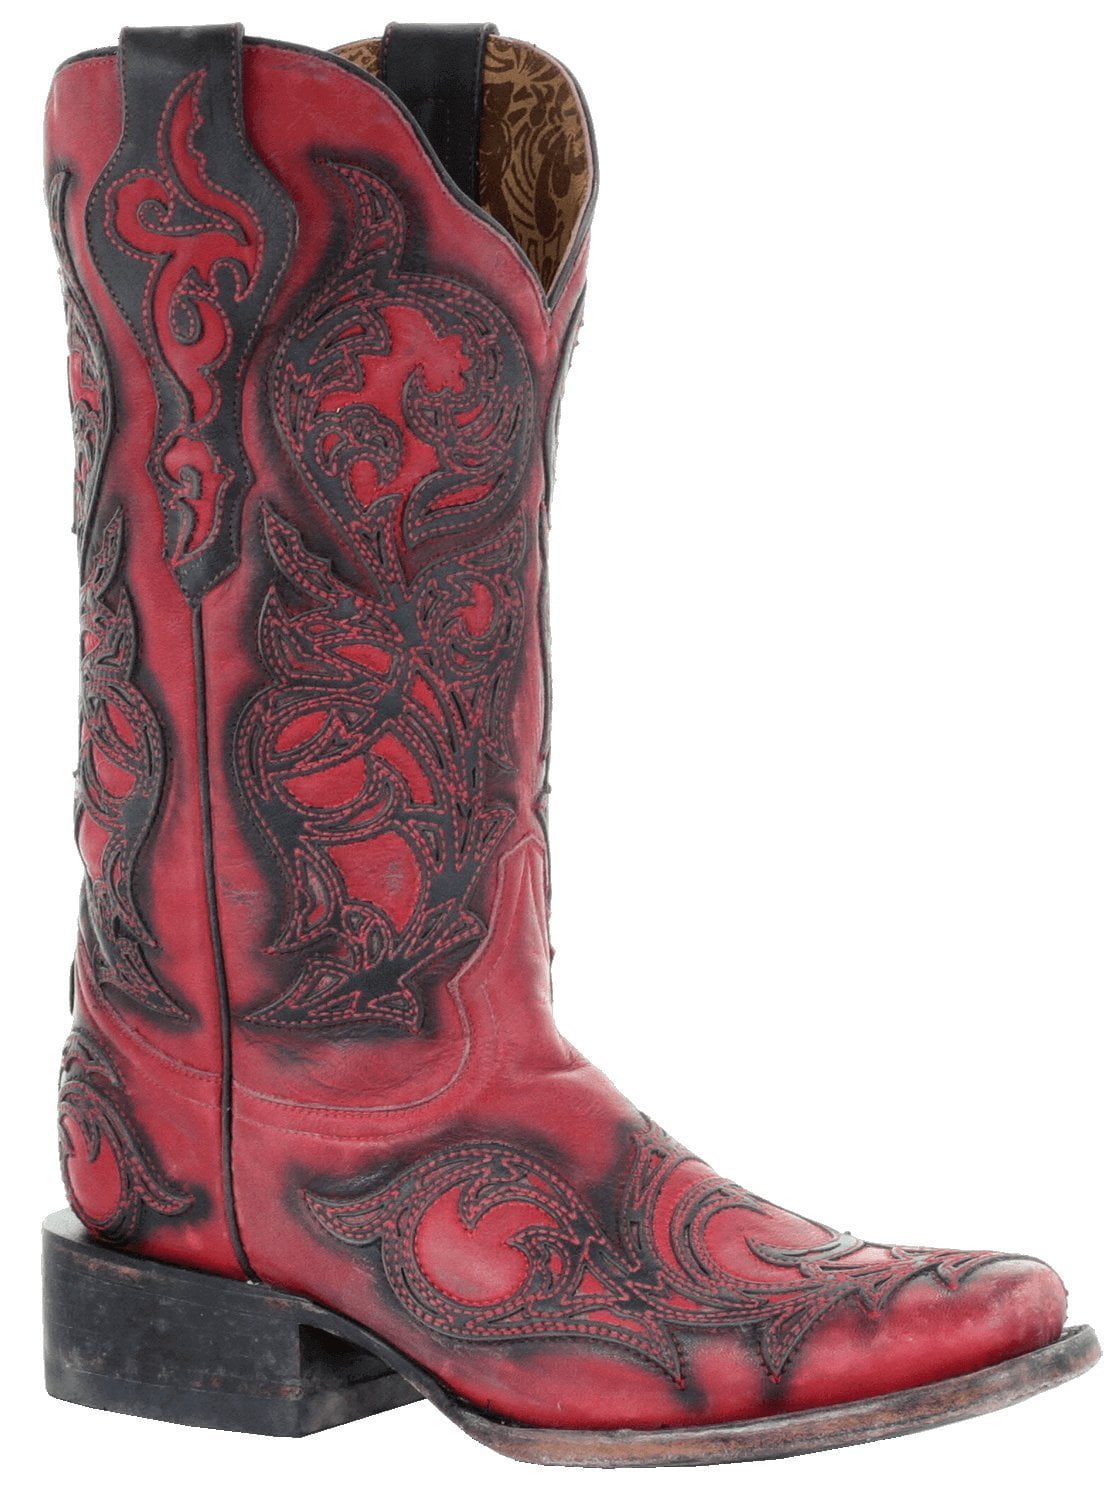 CORRAL Women's Red with Black Overlay Square Toe Cowgirl Boots G1468 (8 ...